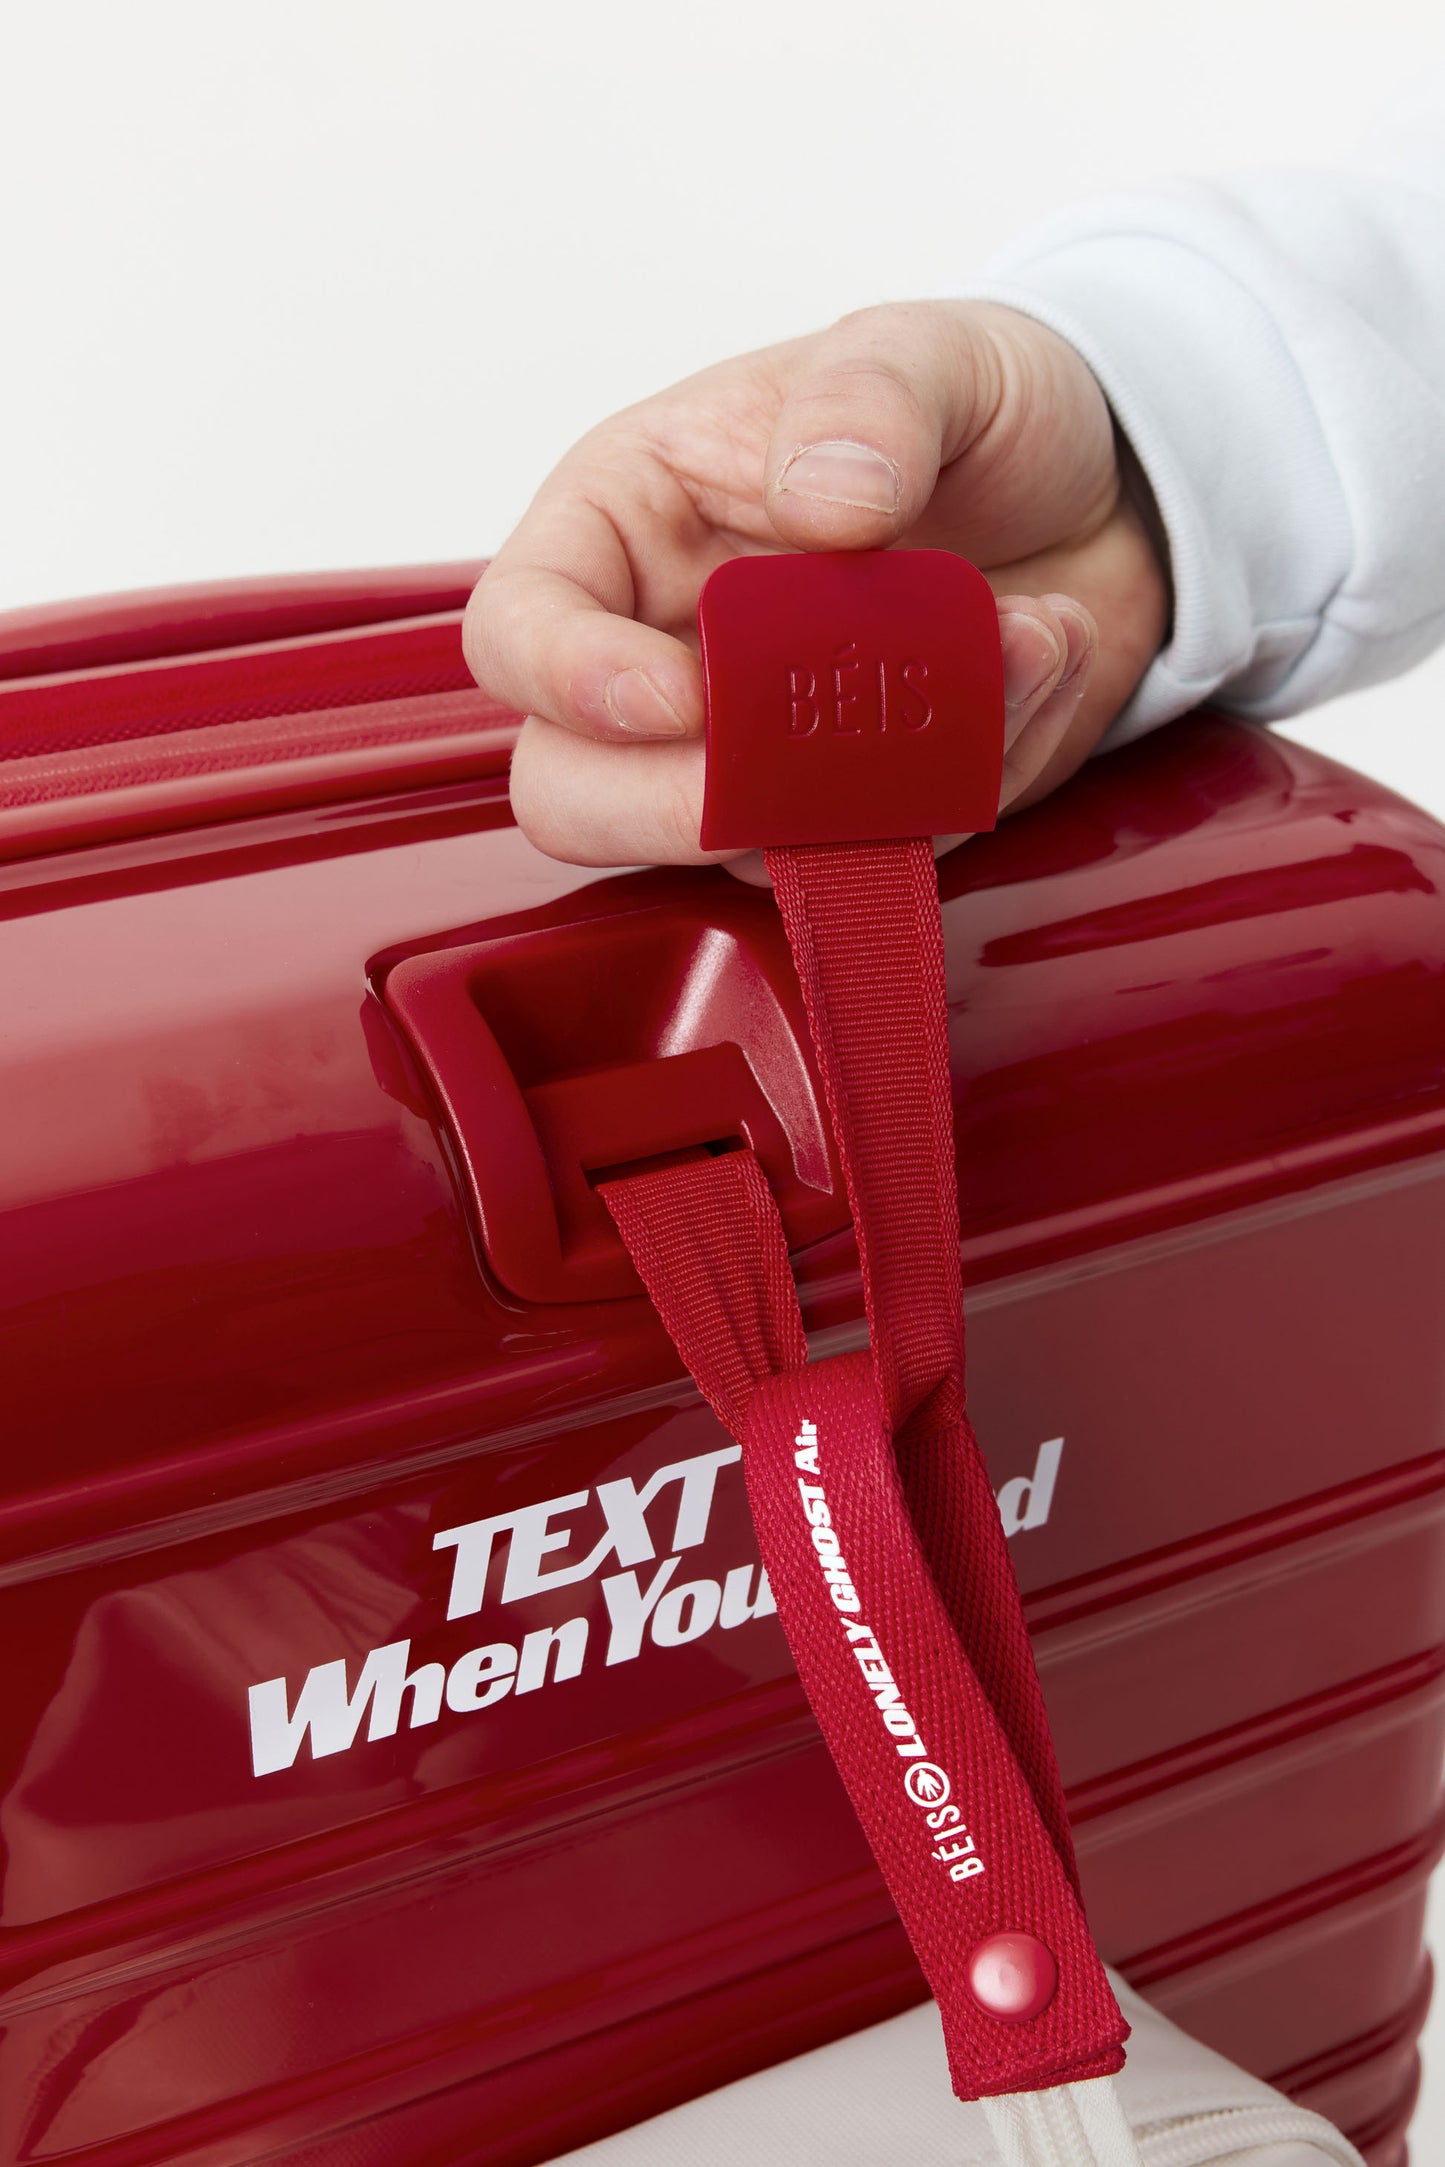 The Carry-On Roller in Text Me Red